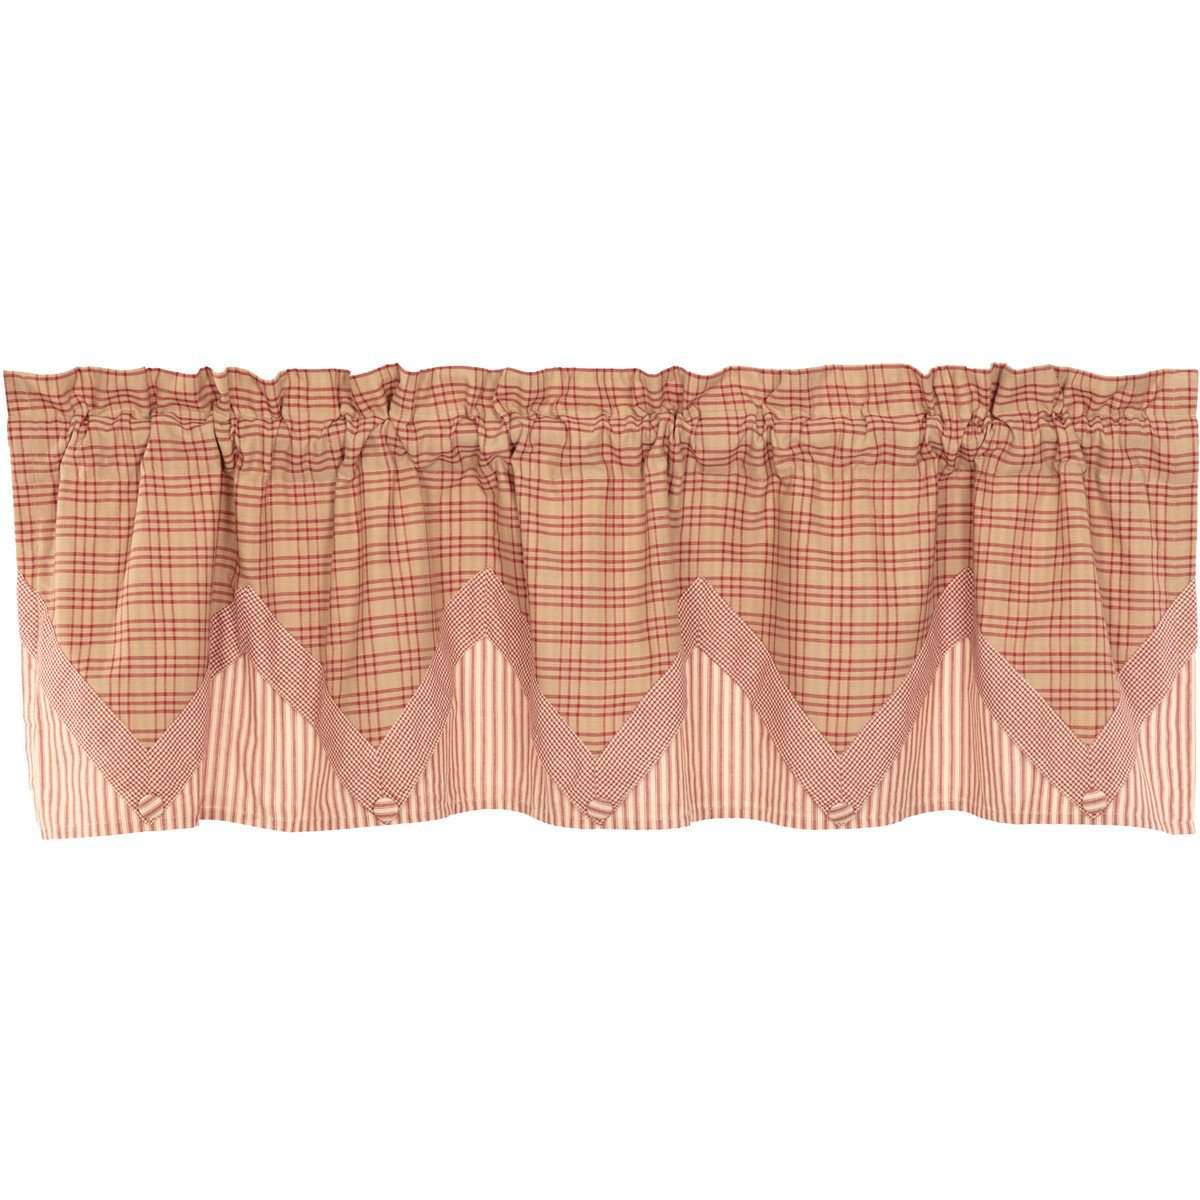 Sawyer Mill Red Valance Curtain Layered VHC Brands - The Fox Decor